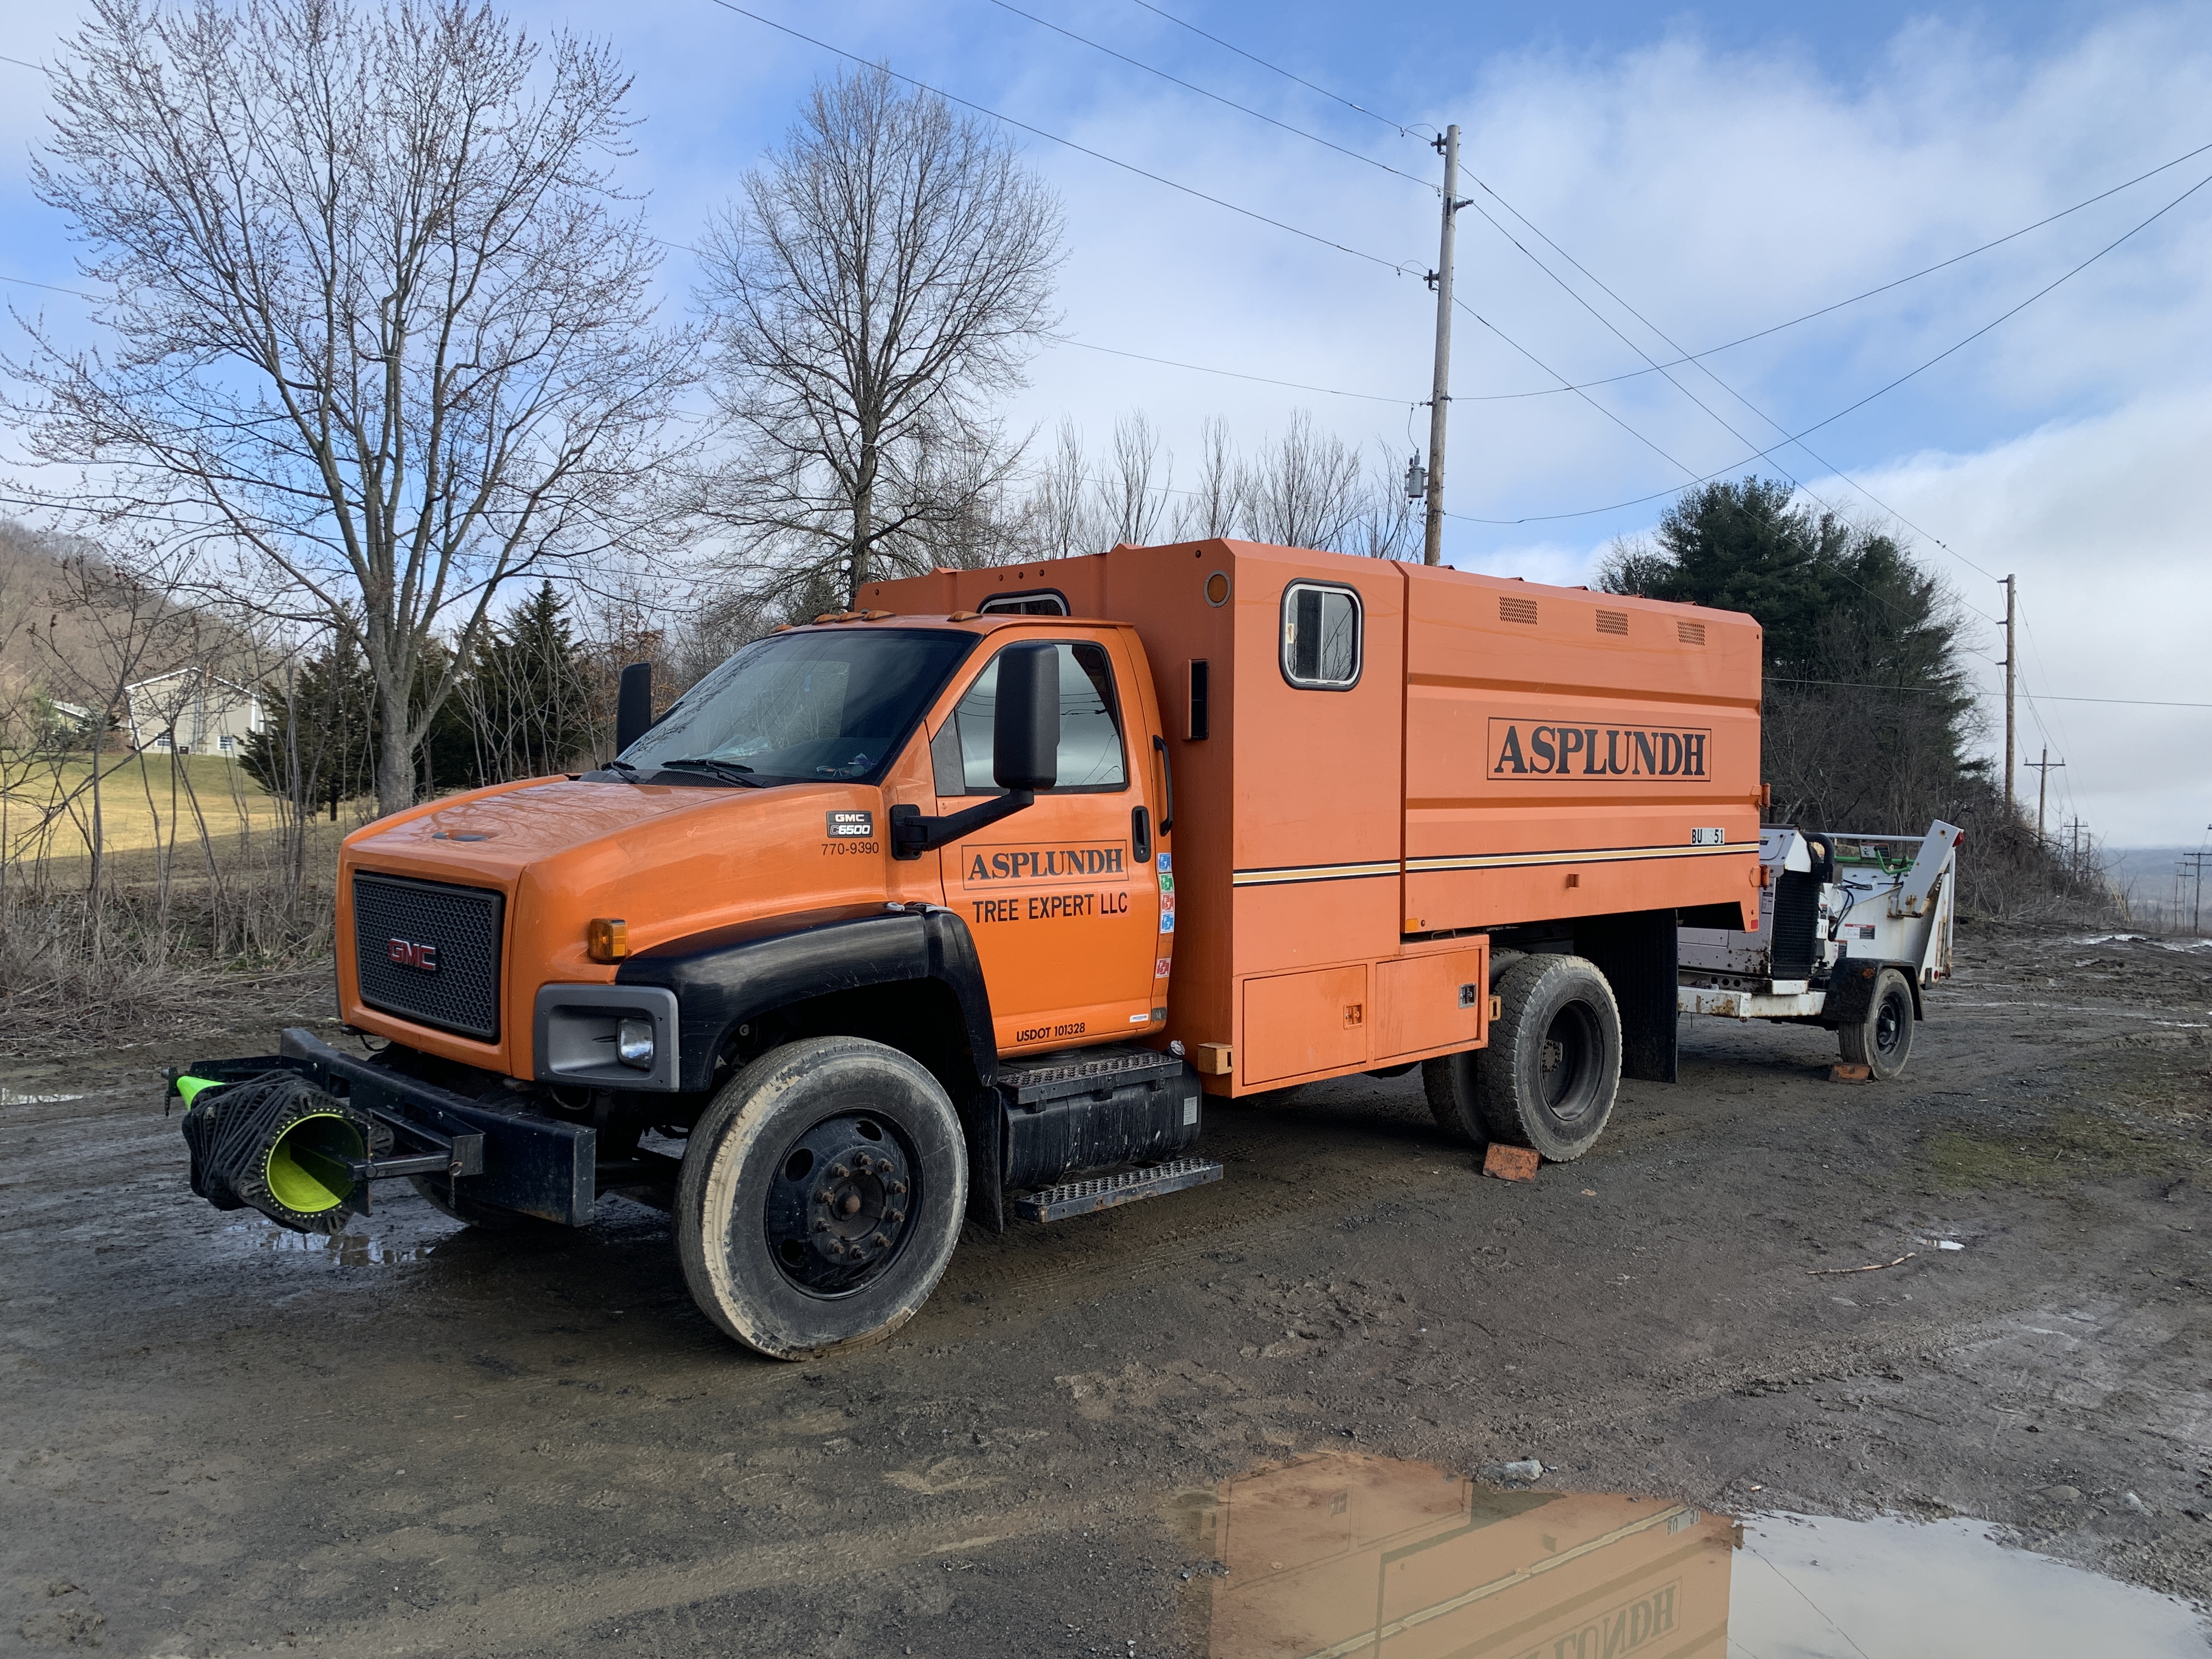 Photo of one of the orange trucks of SREC's current tree contractor, Asplundh Tree Experts LLC.